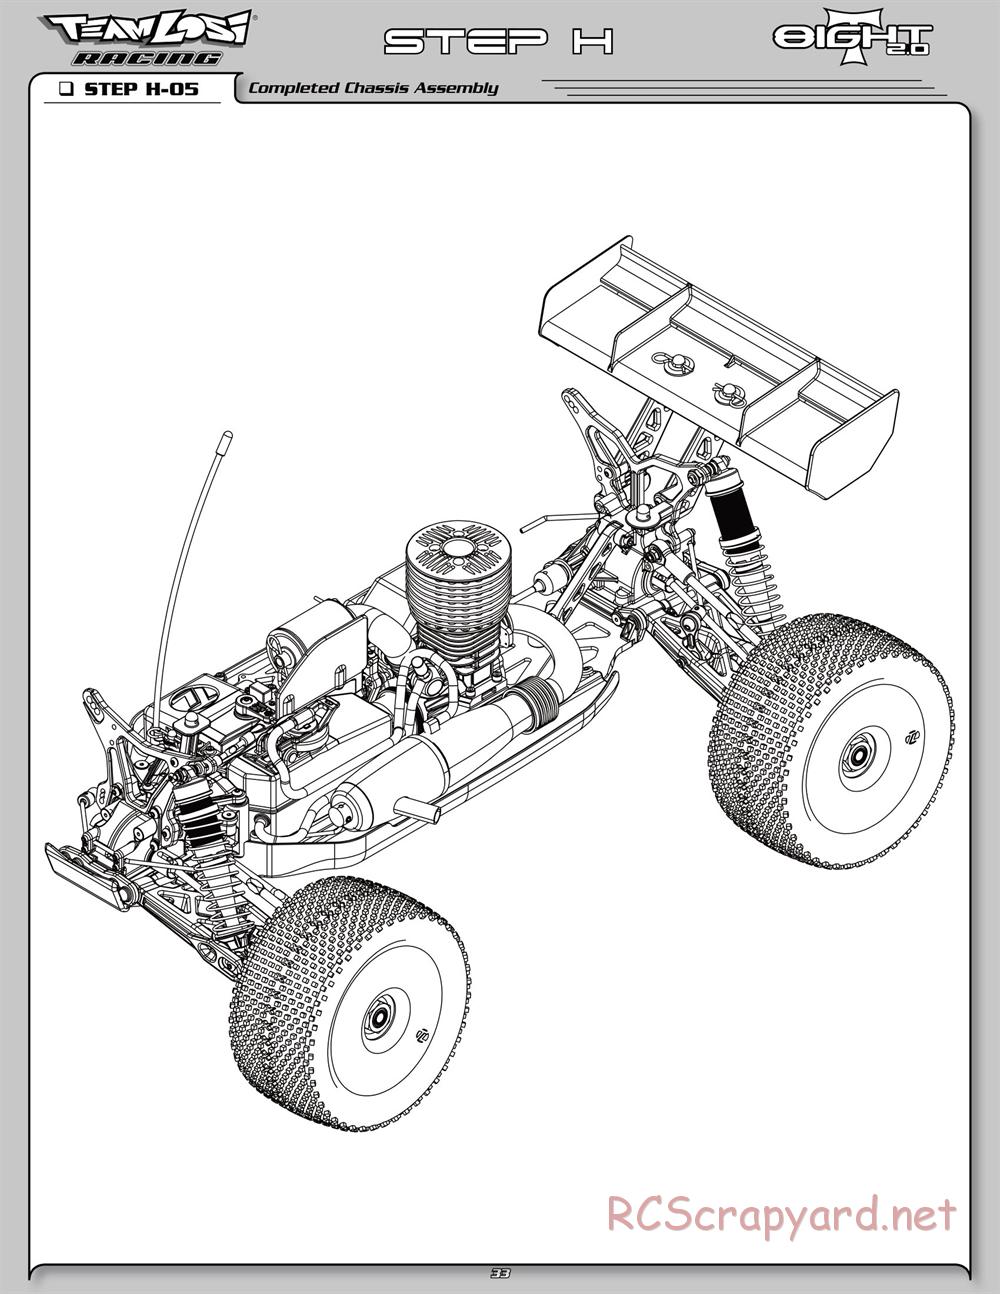 Team Losi - 8ight-T 2.0 Race Roller - Manual - Page 38